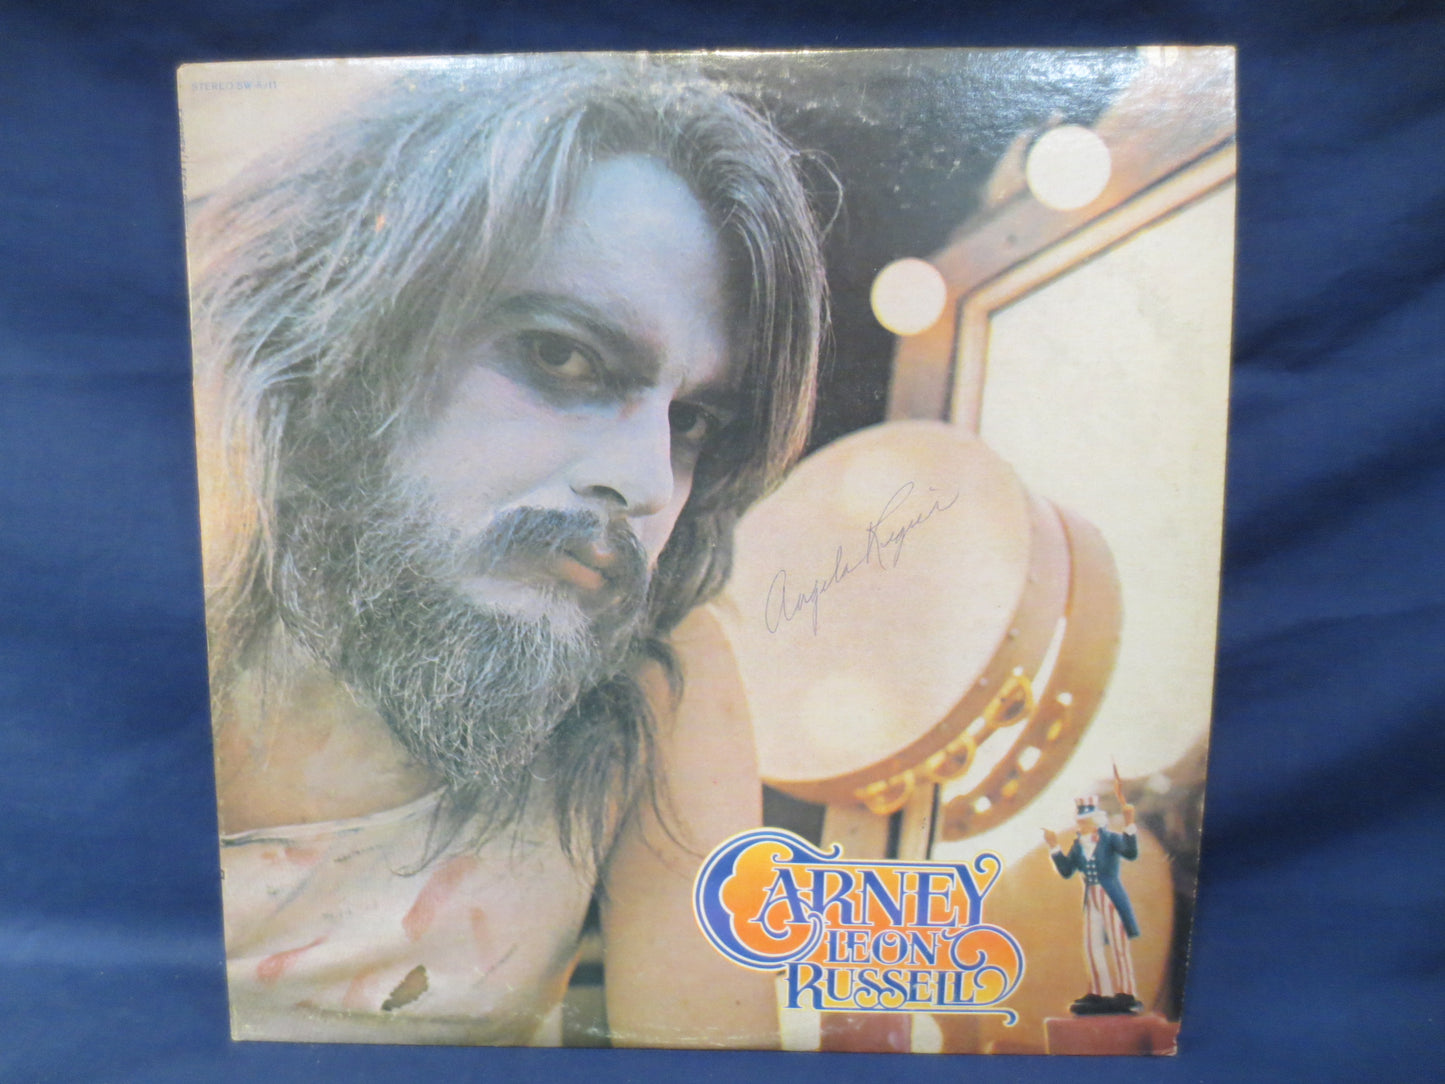 LEON RUSSELL Record, Leon Russell CARNEY, Leon Russell Vinyl, Leon Russell Album, Vintage Vinyl, Vintage Lp, 1972 Records